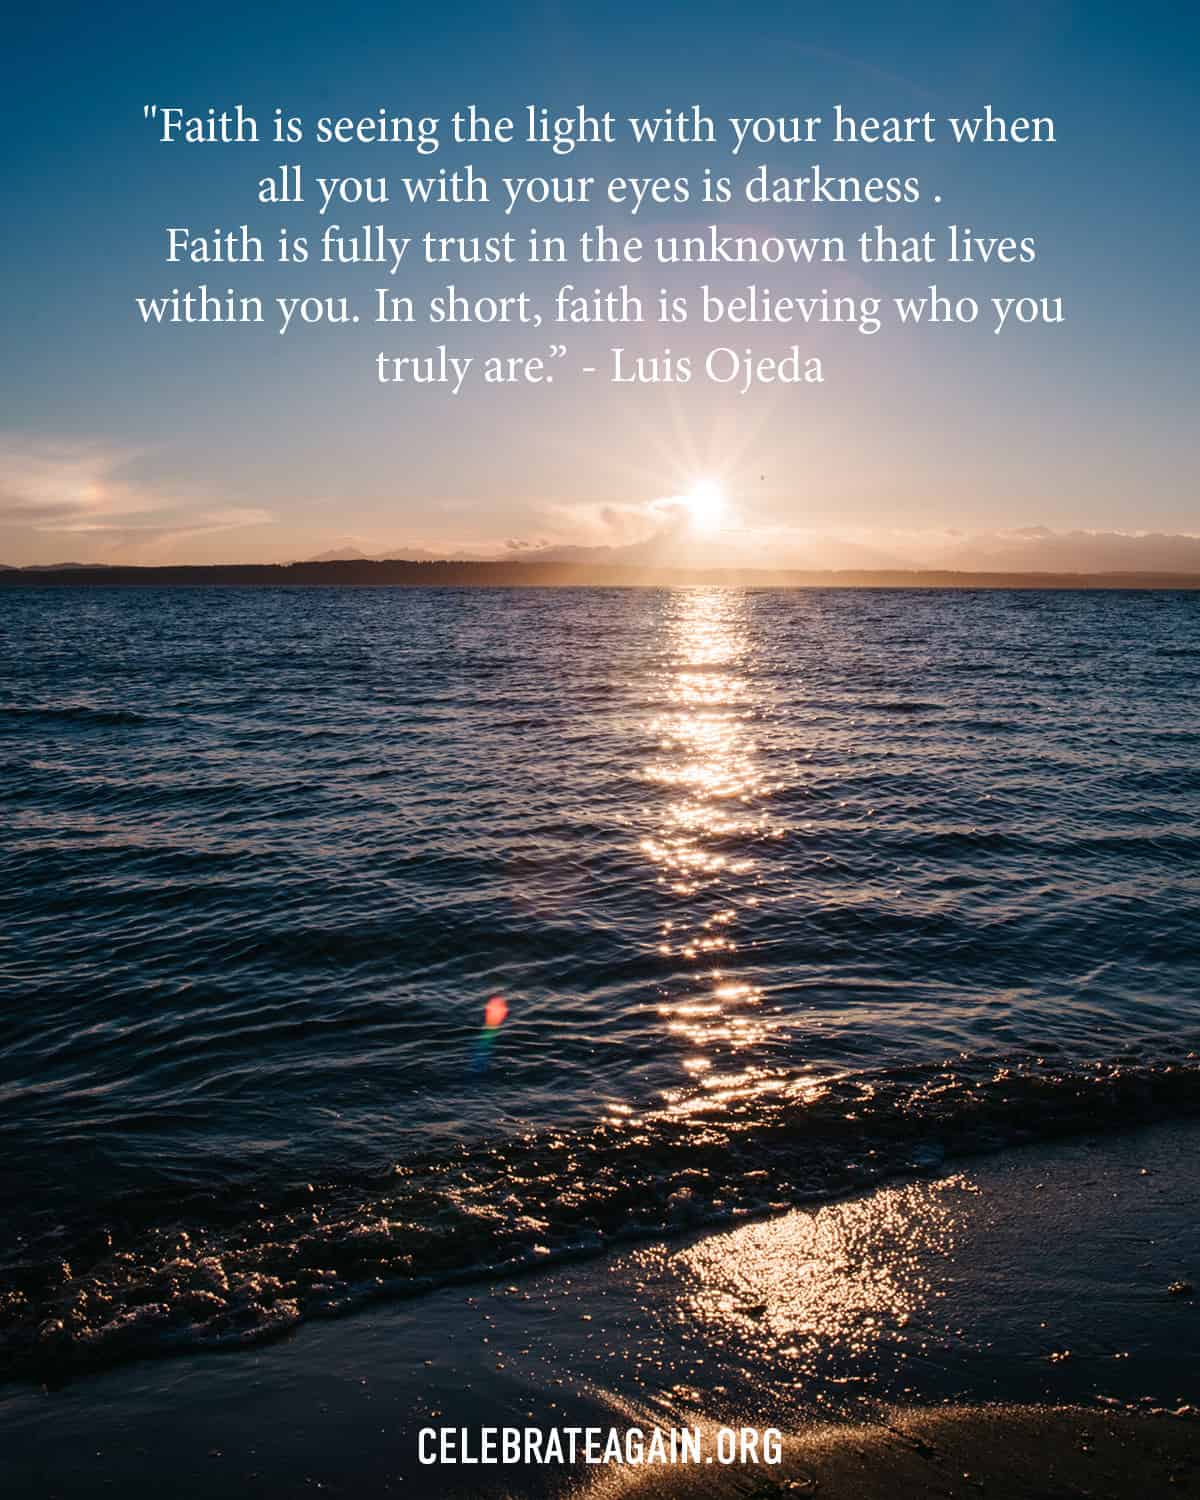 a self love quote for building resilience saying "Faith is seeing the light with your heart when all you with your eyes is darkness . Faith is fully trust in the unknown that lives within you. In short, faith is believing who you truly are.’ Luis Ojeda over a photo of the sunsetting on a beach